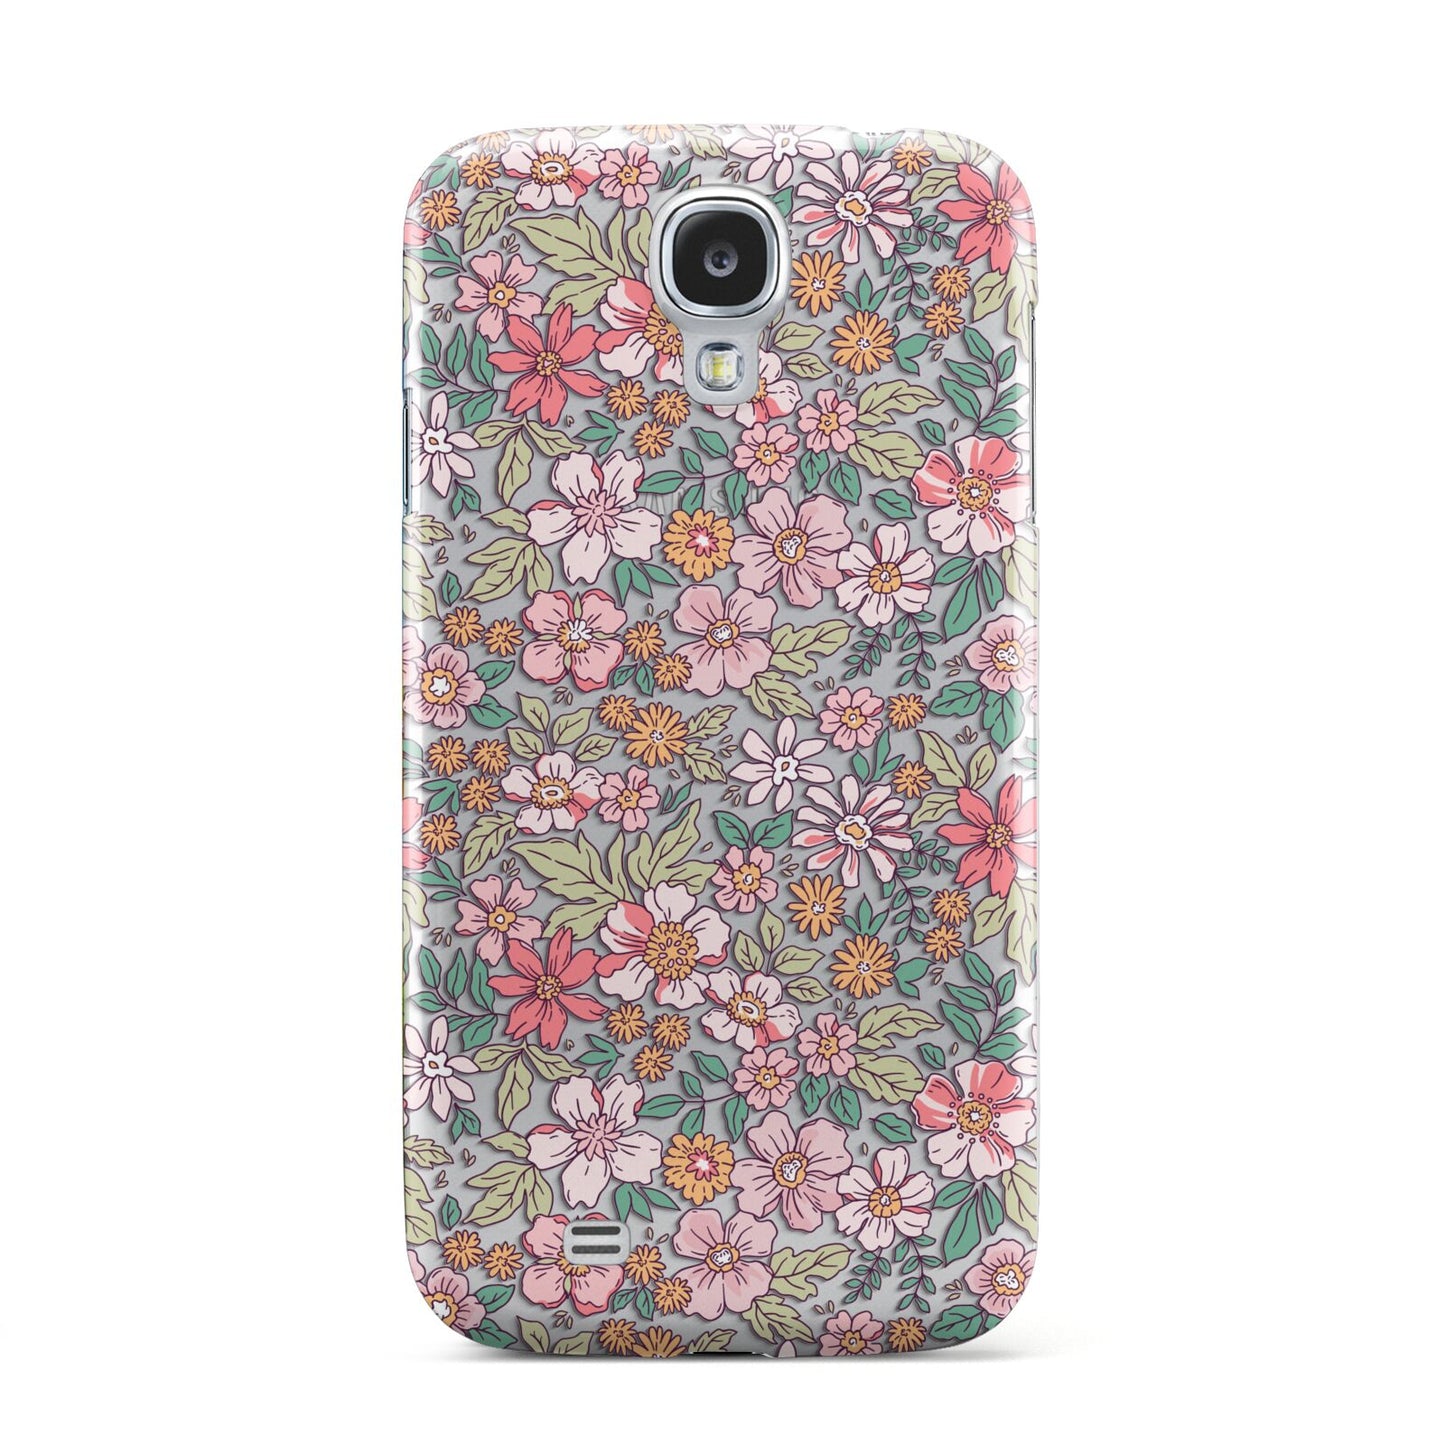 Small Floral Pattern Samsung Galaxy S4 Case